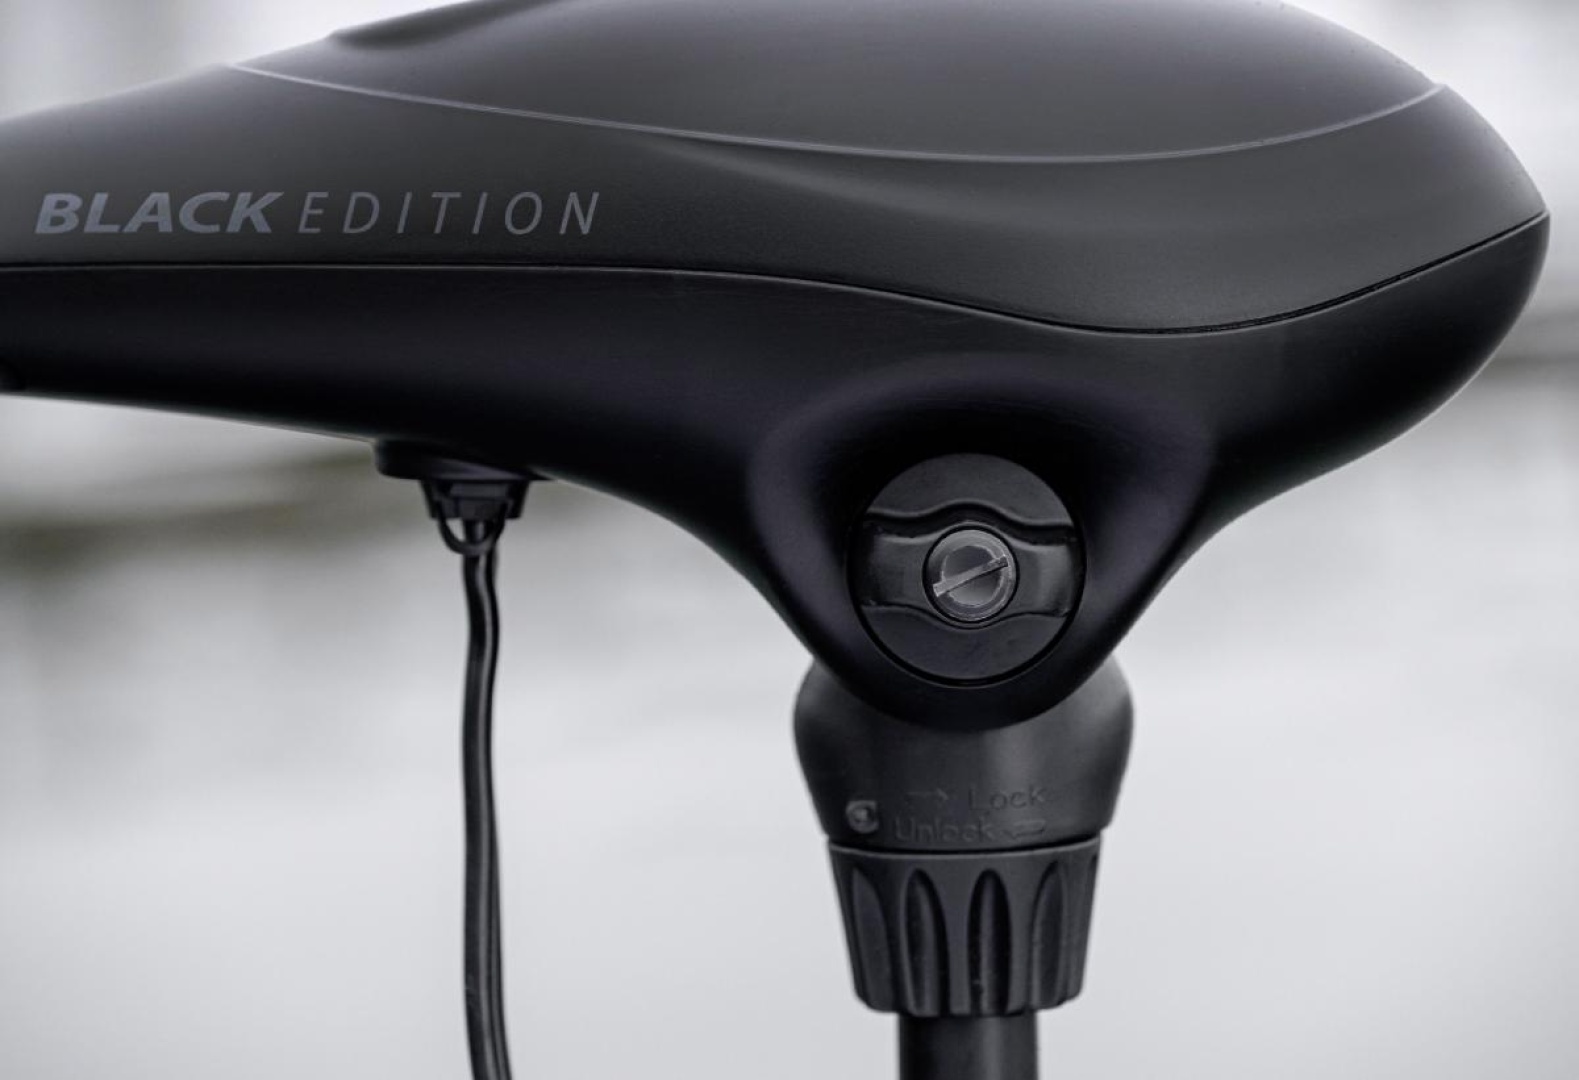 Rhino BE 65 Black Edition Electric Outboard Motor